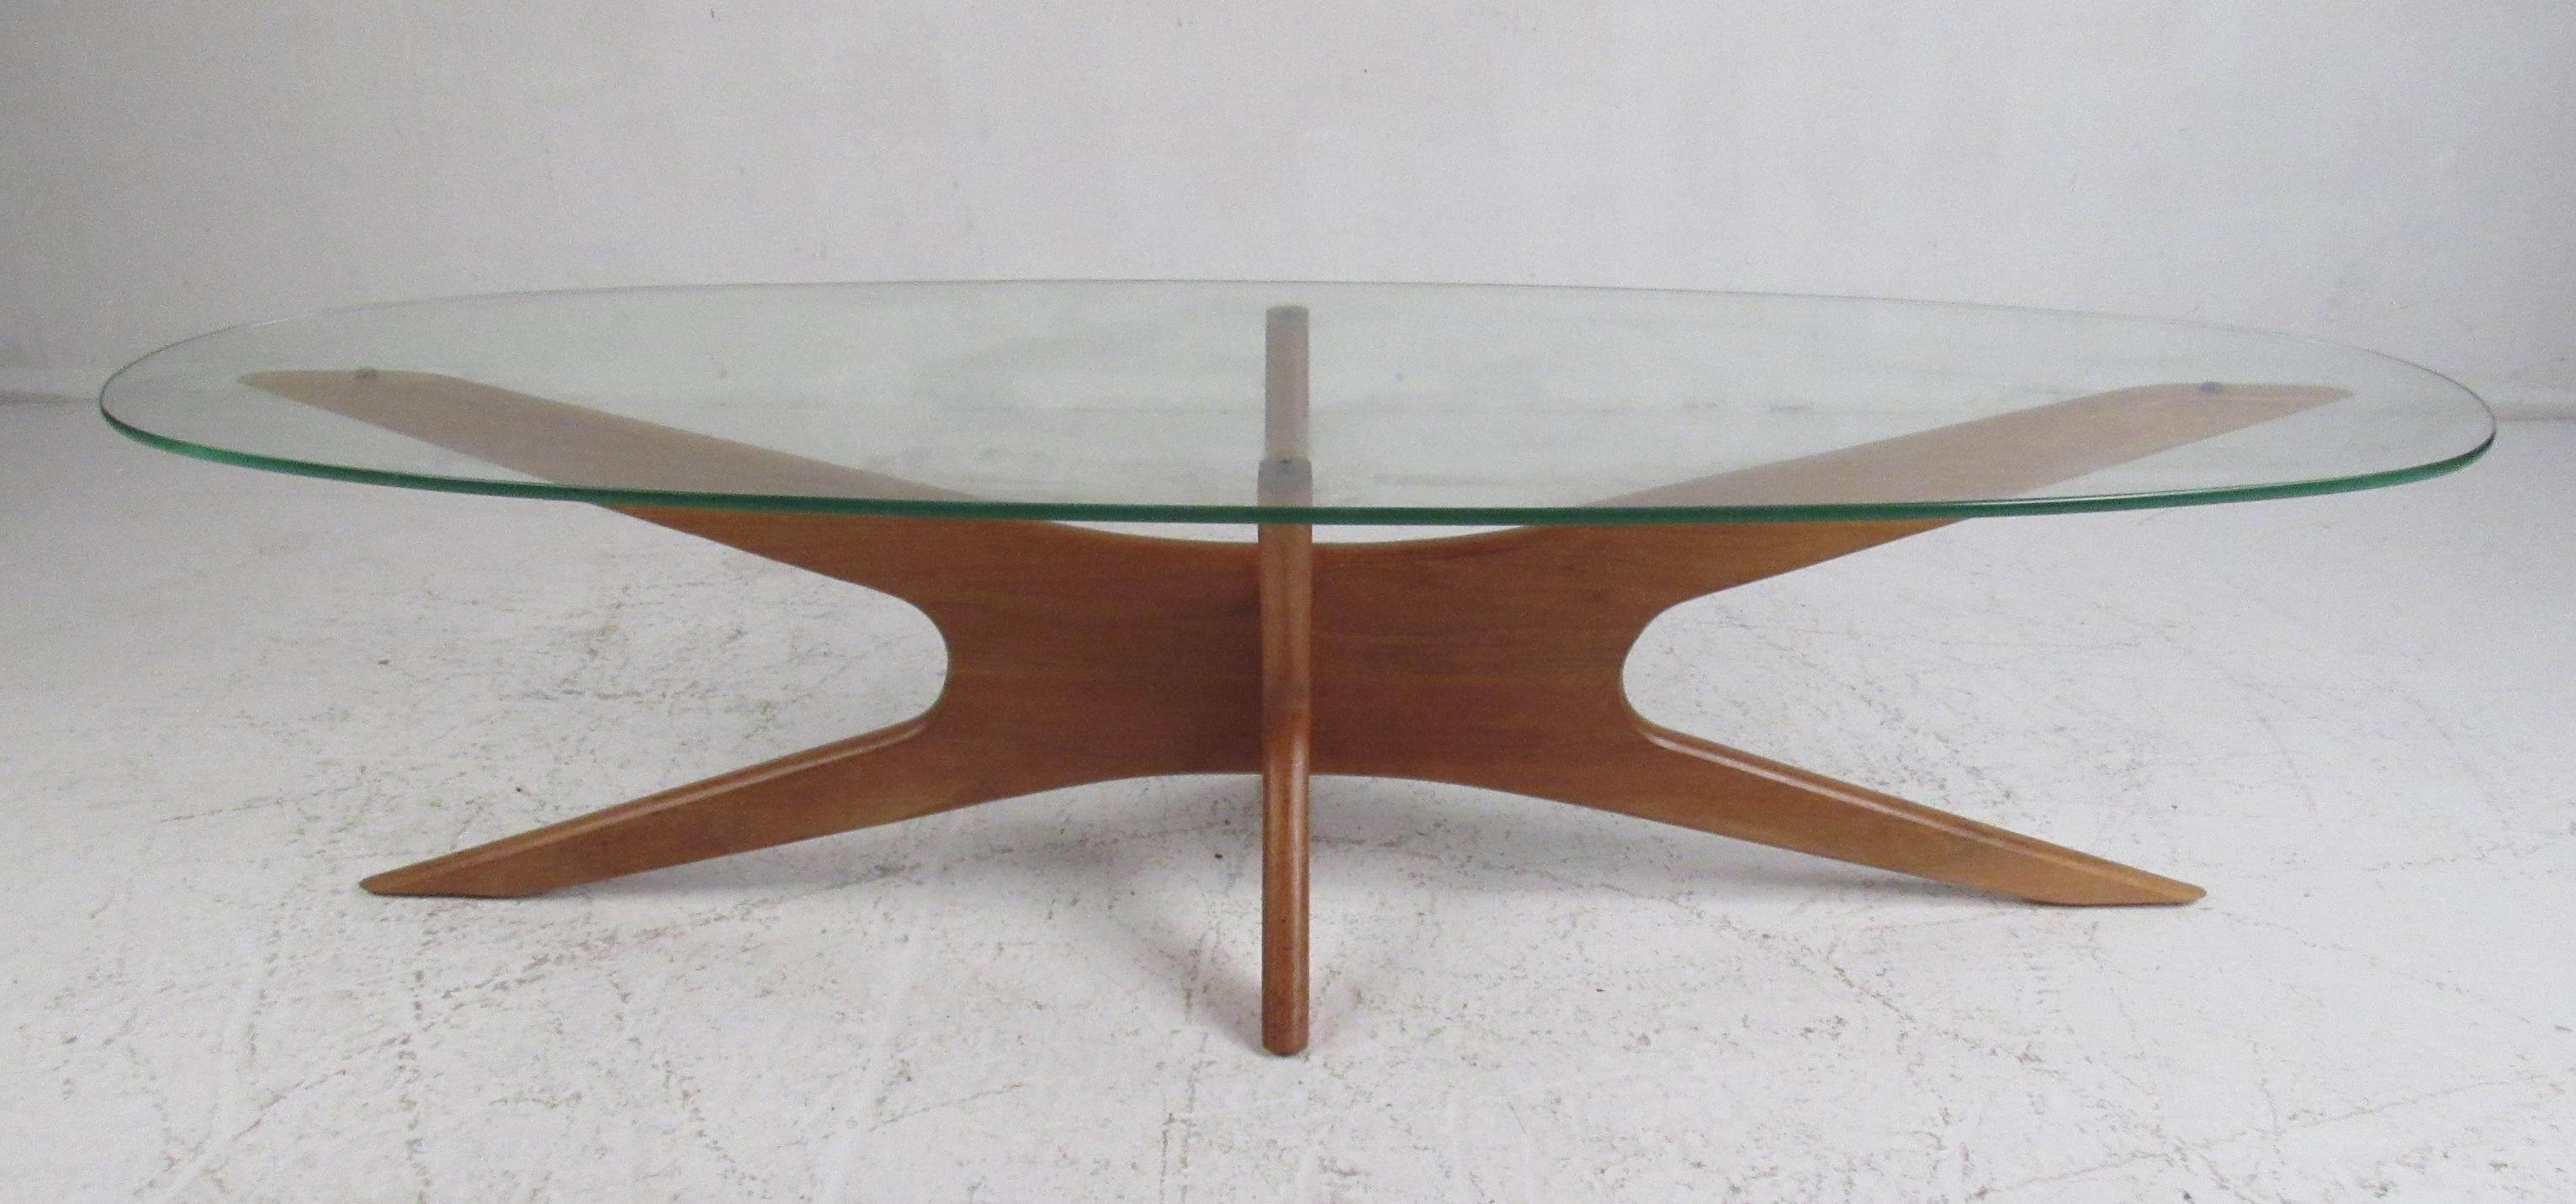 This beautiful vintage modern cocktail table features the iconic walnut 